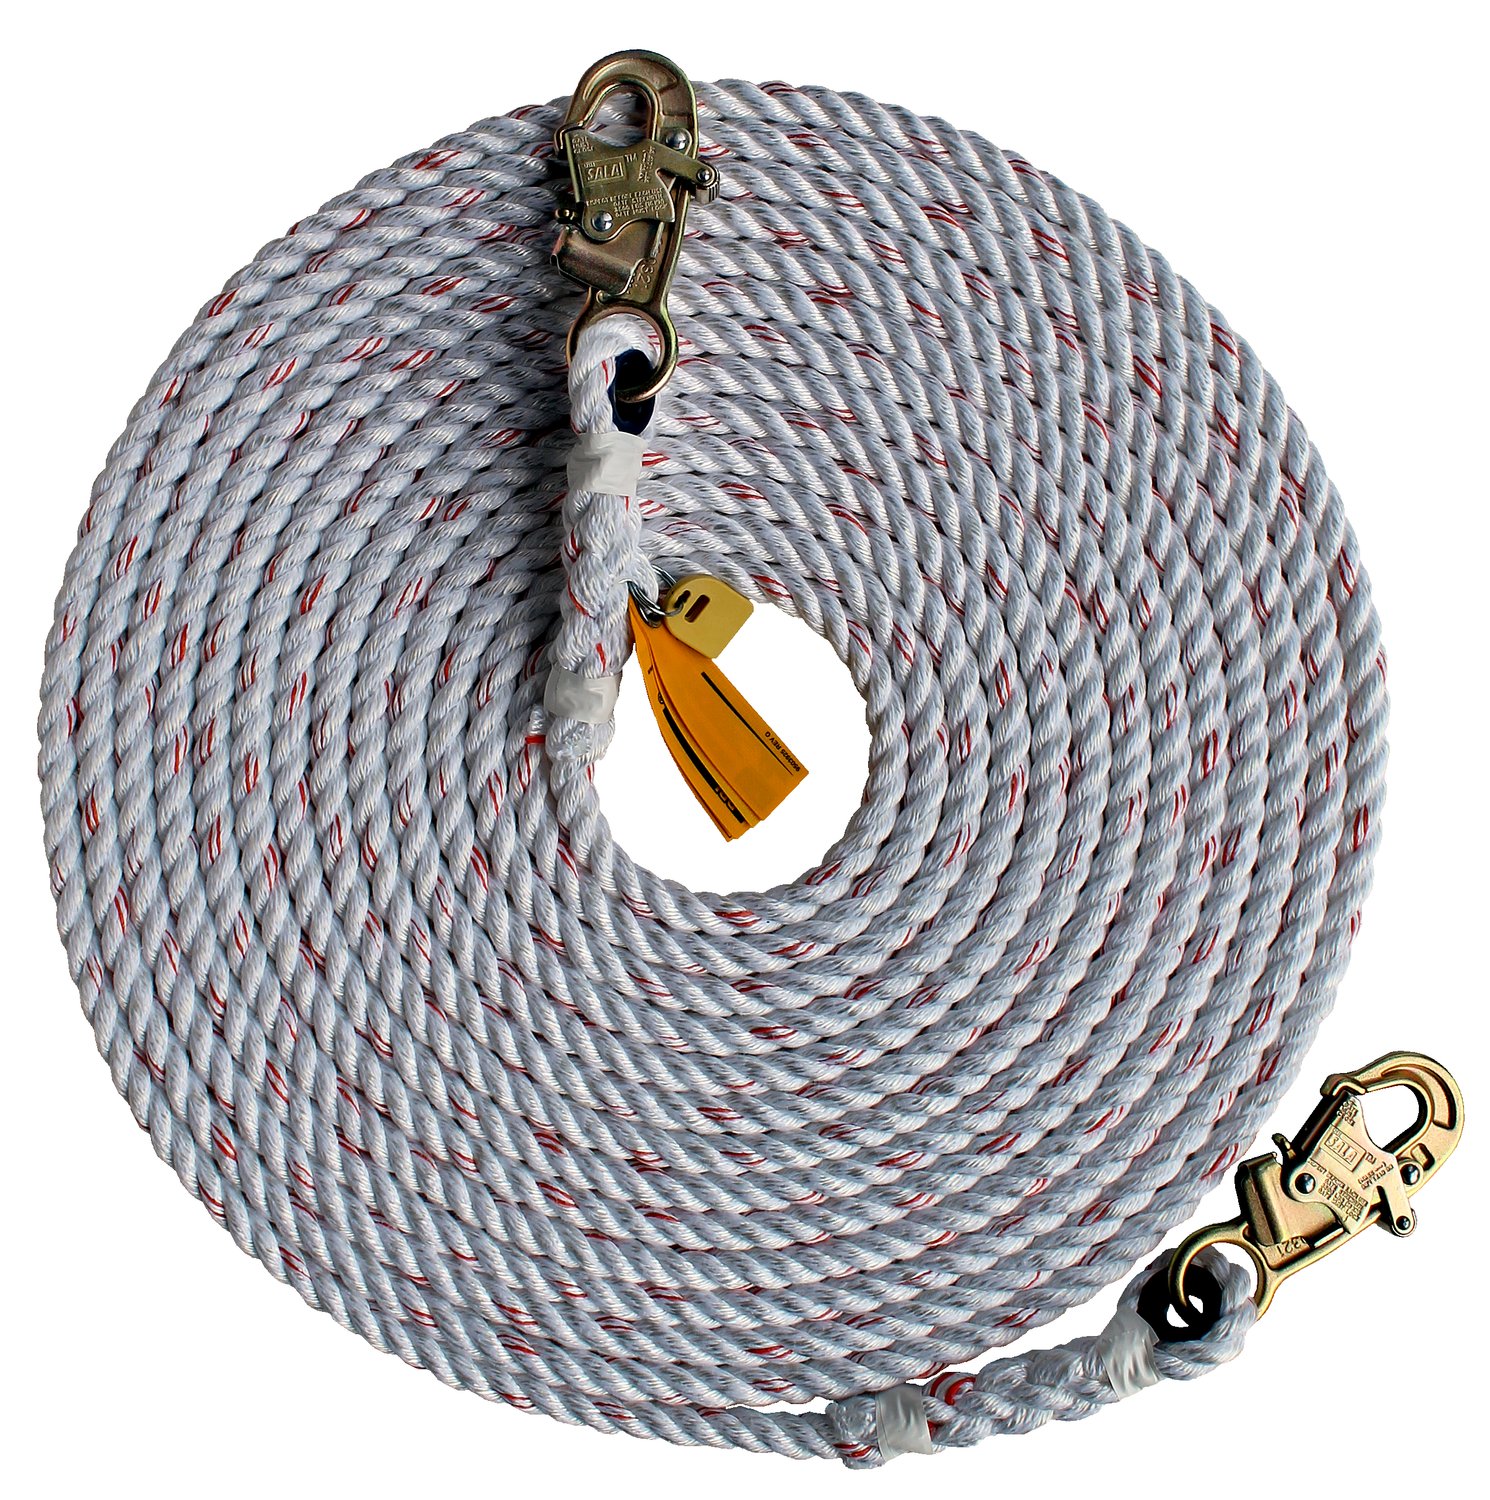 7100262939 - 3M DBI-SALA Rope Lifeline with Snap Hook Both Ends 1202842, 5/8 in Polyester and Polypropylene Blend, White, 100 ft